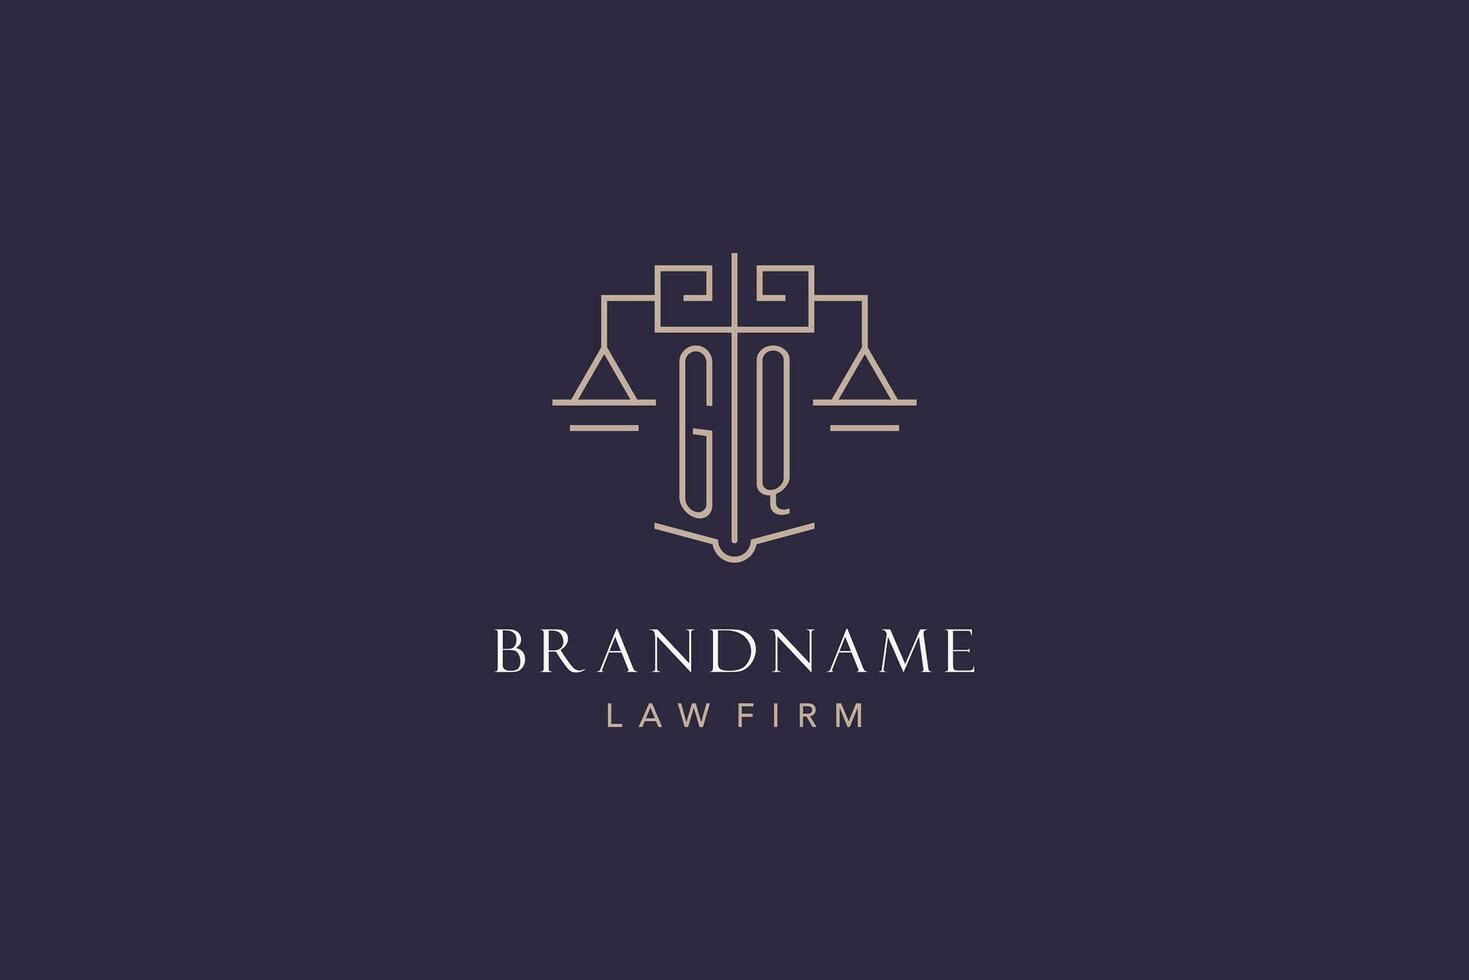 Initial letter GQ logo with scale of justice logo design, luxury legal logo geometric style vector